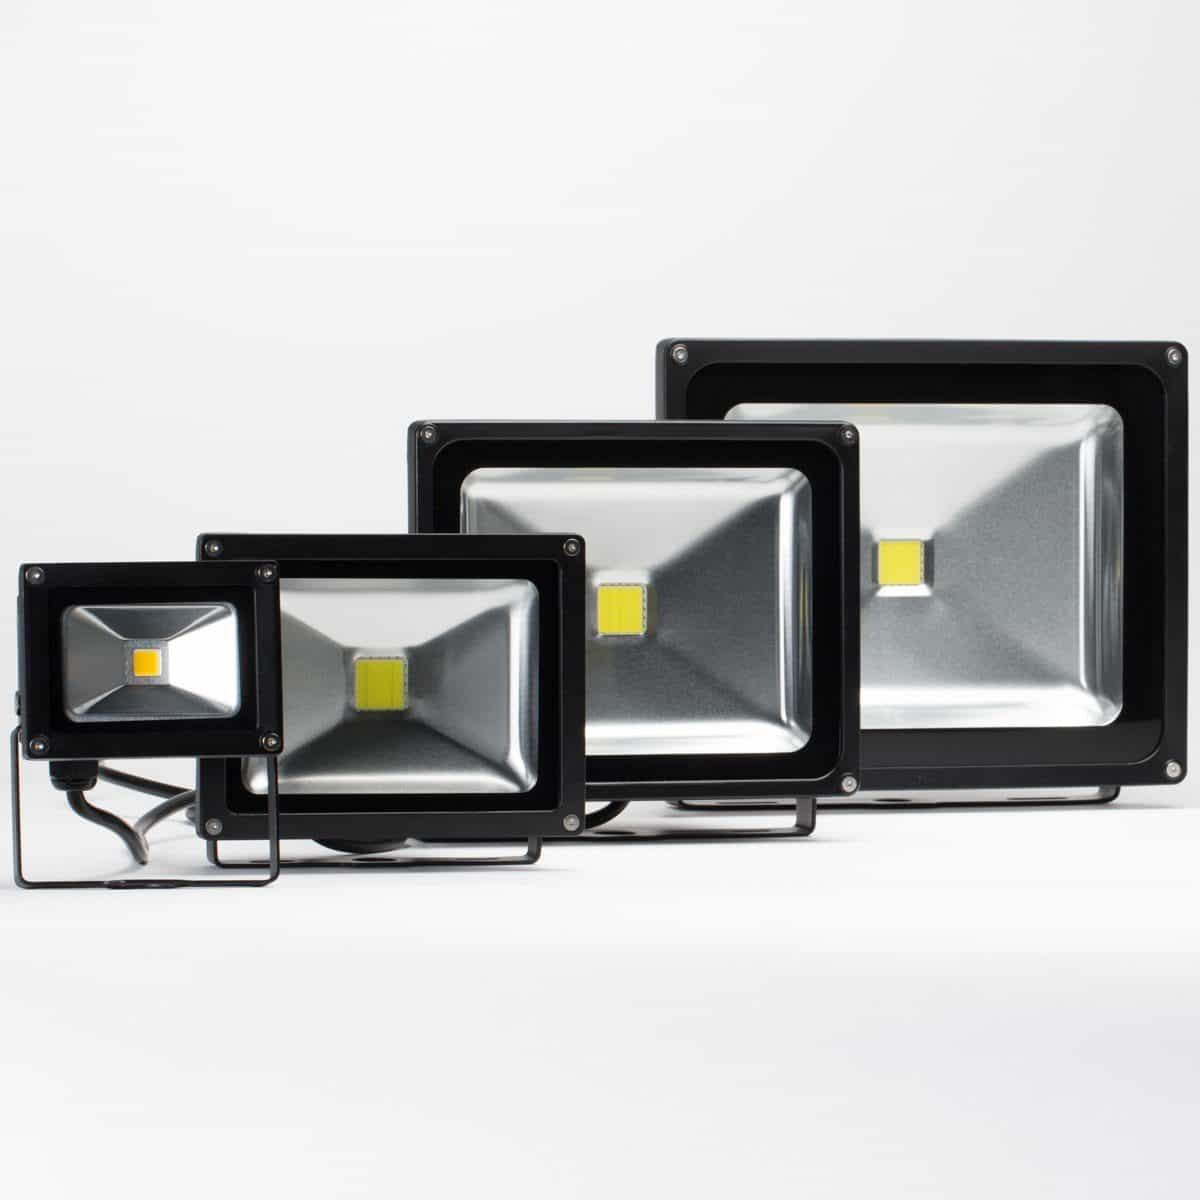 four led flood lights with black housing and clear front lens arranged left to right in small to large order